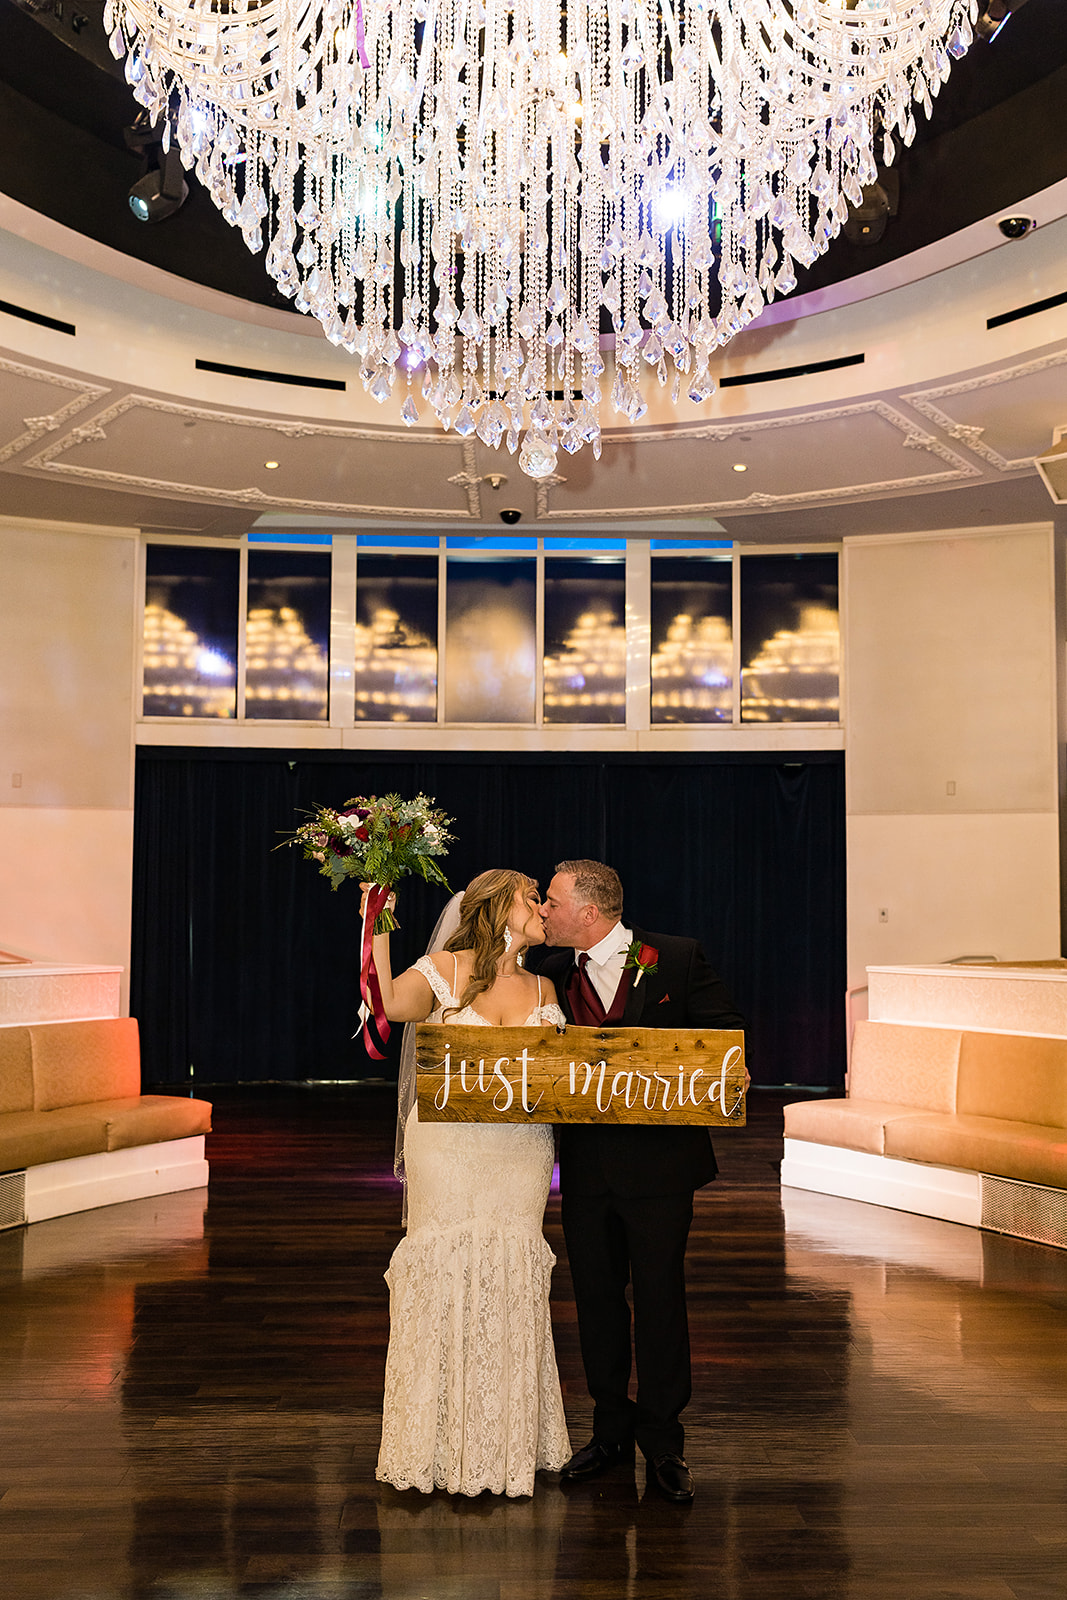 Couple sharing a kiss during their elopement shoot in Las Vegas while holding up Just Married sign